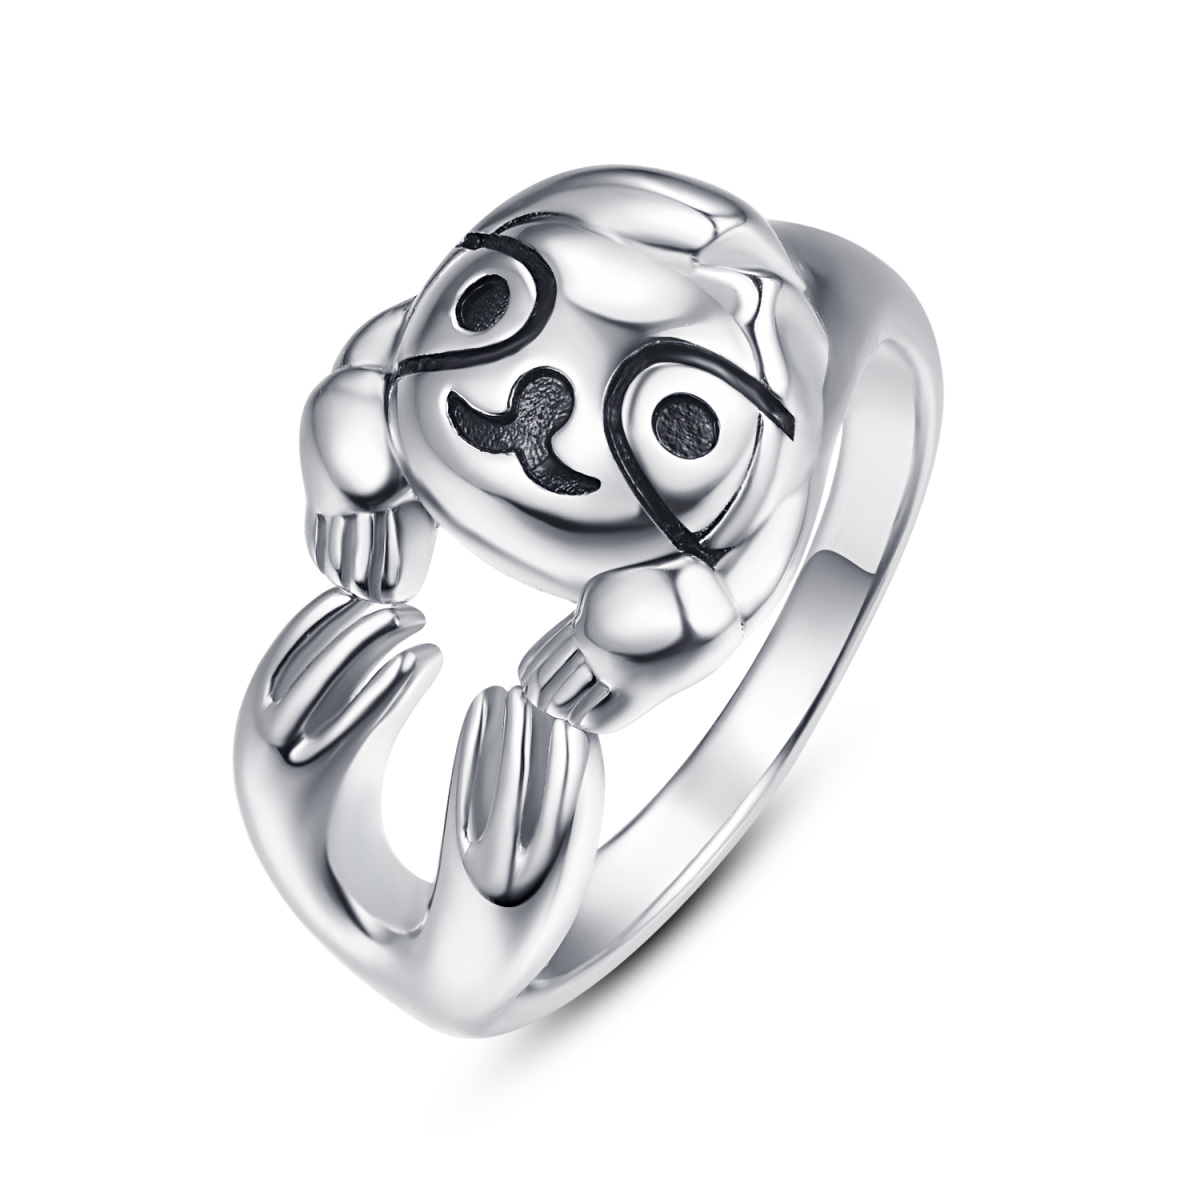 Sterling Silver Sloth Open Ring-1